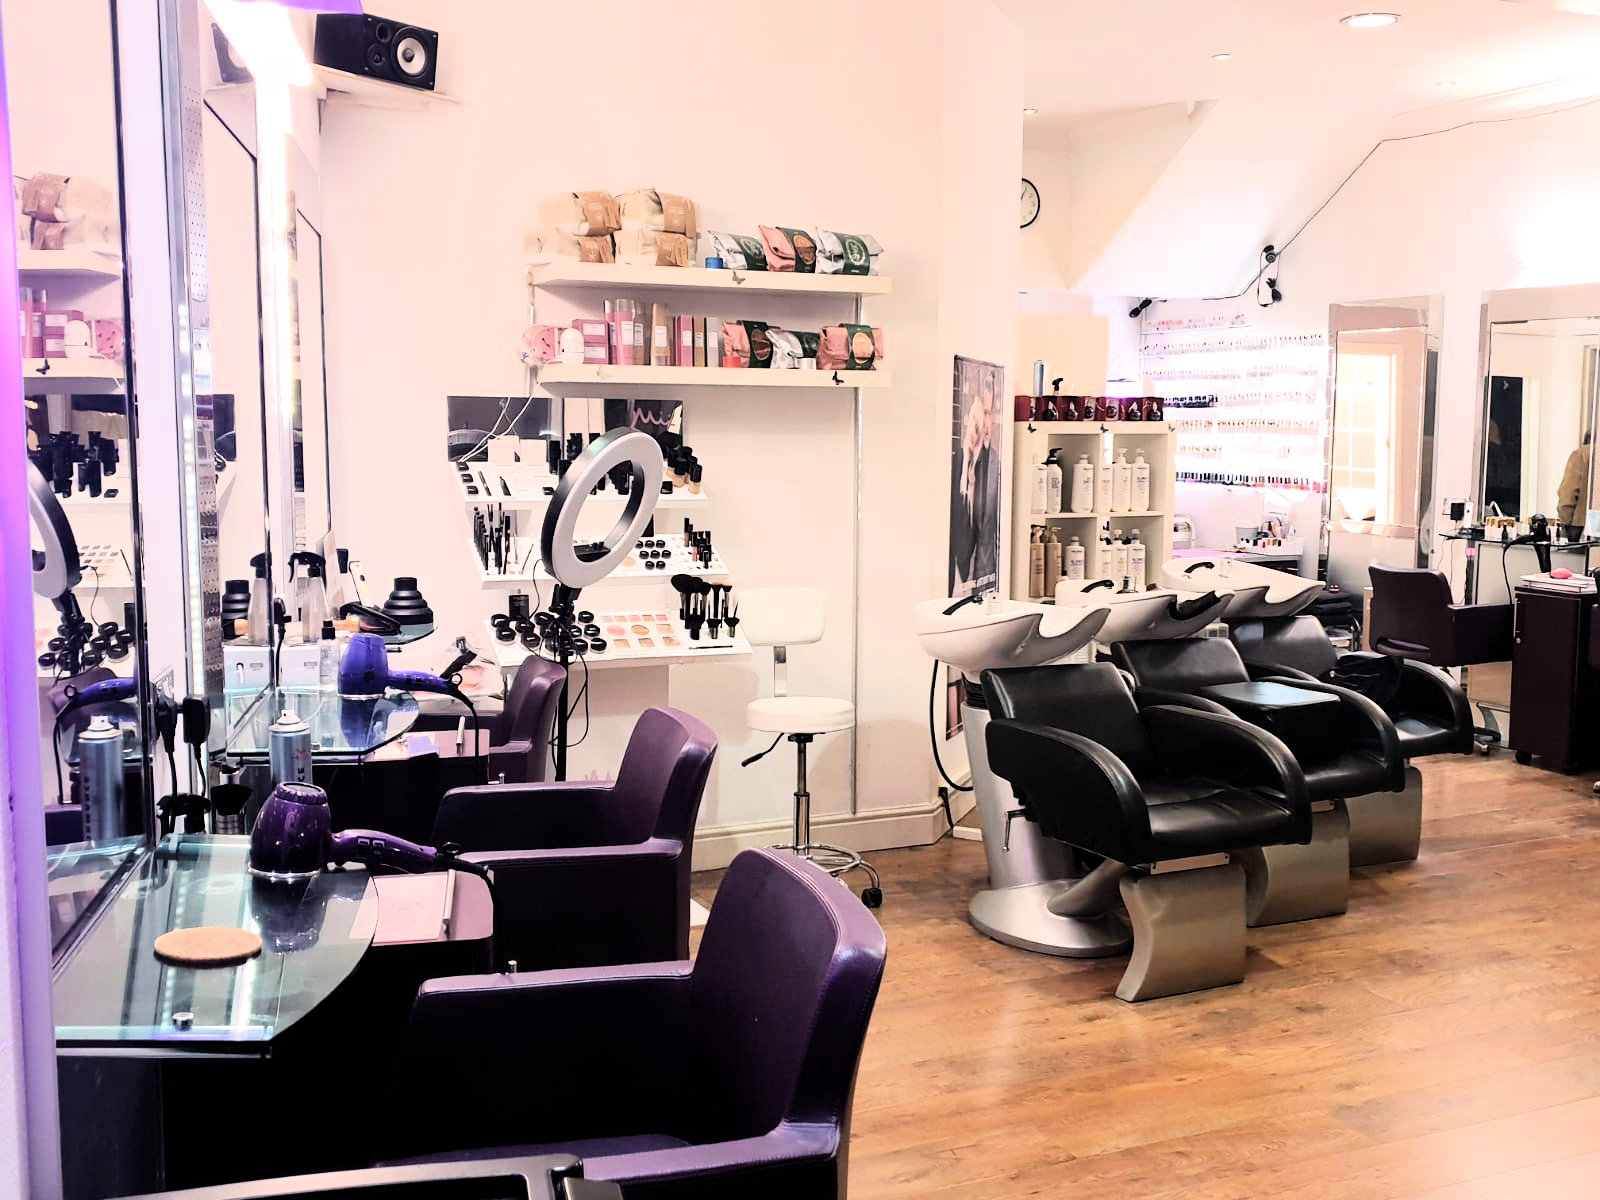 LOVELY HAIR AND BEAUTY SALON, ENFIELD, MIDDLESEX